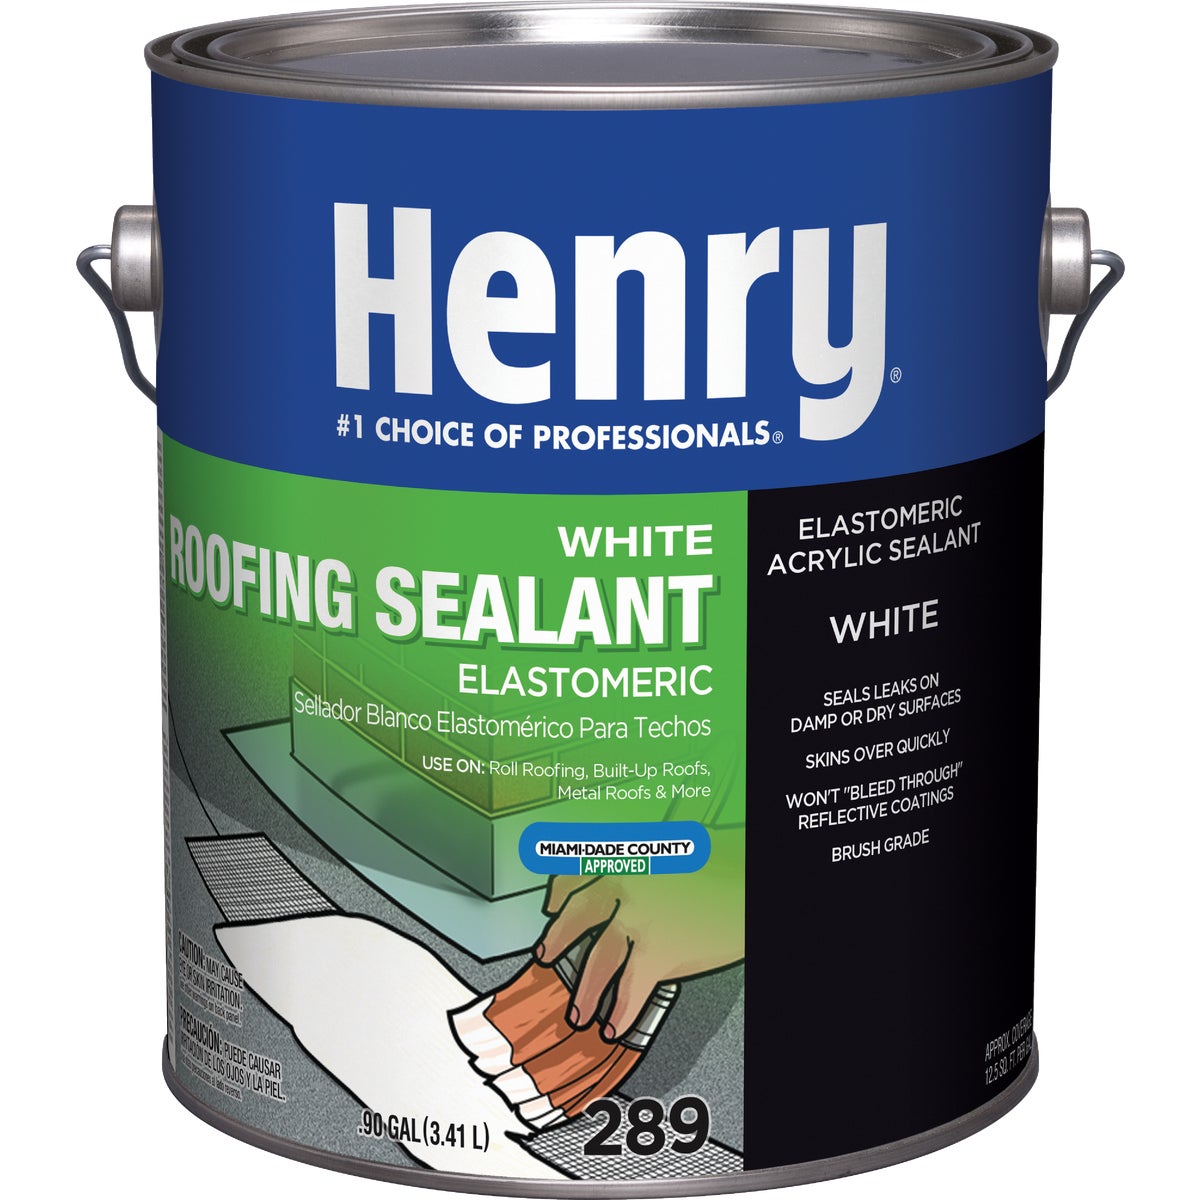 Roof Cement & Patching Sealant